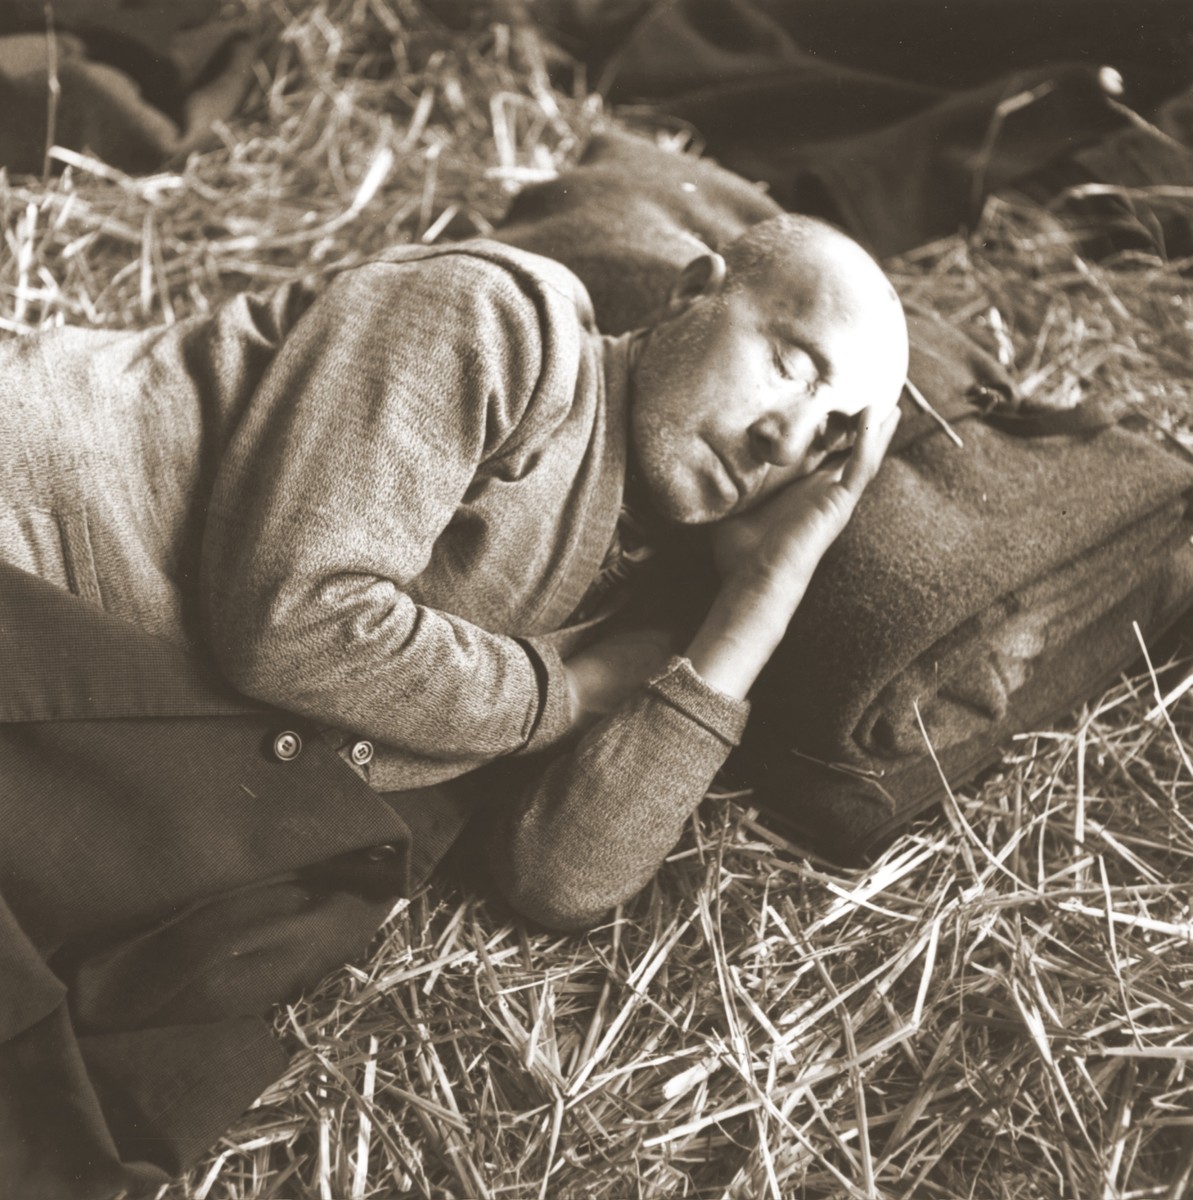 A elderly Jewish man rescued from Theresienstadt rests on a bed of straw in the Hadwigschulhaus in St. Gallen.